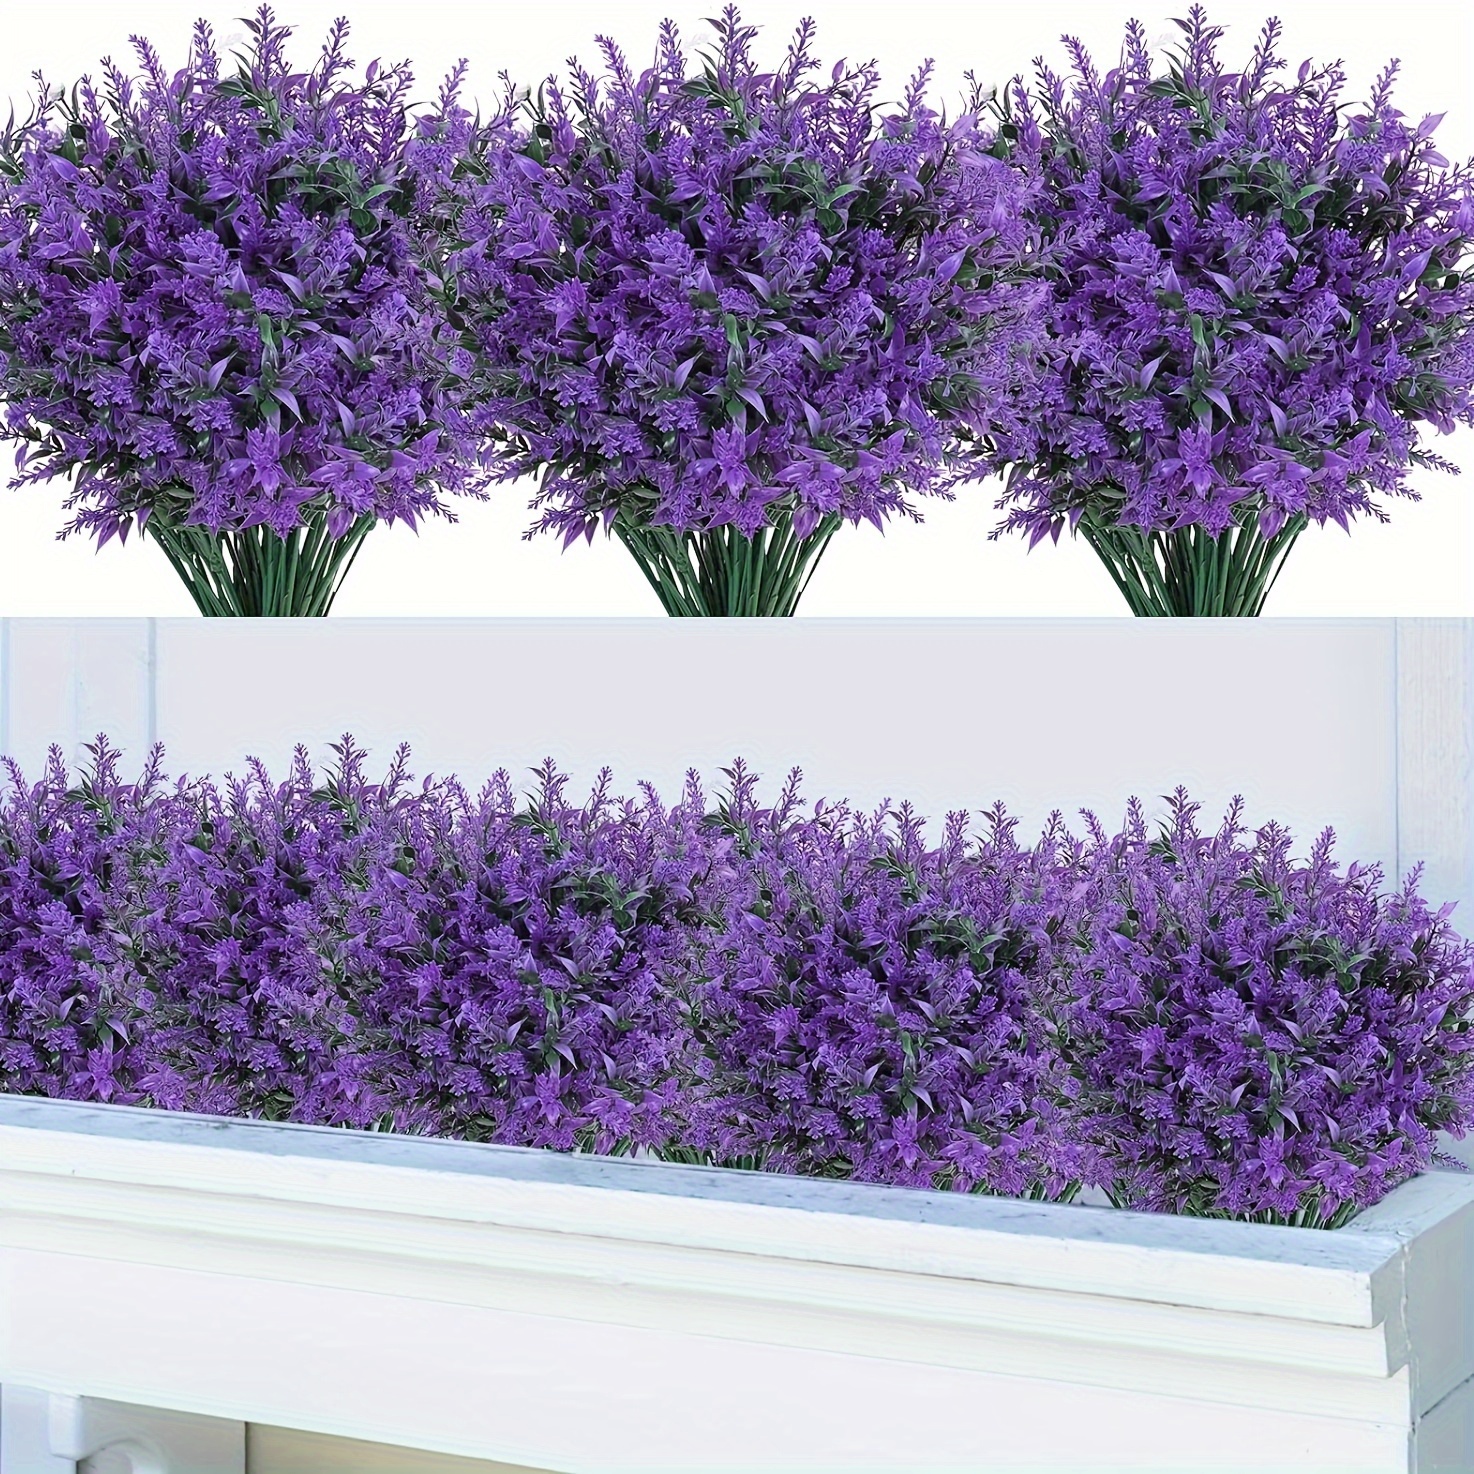 

25 Bundles Artificial Lavender Flowers Outdoors Fake Shrubs Greenery Plants Indoor Uv Resistant Plastic Faux Bouquets For Outdoor Home Garden Porch Decoration